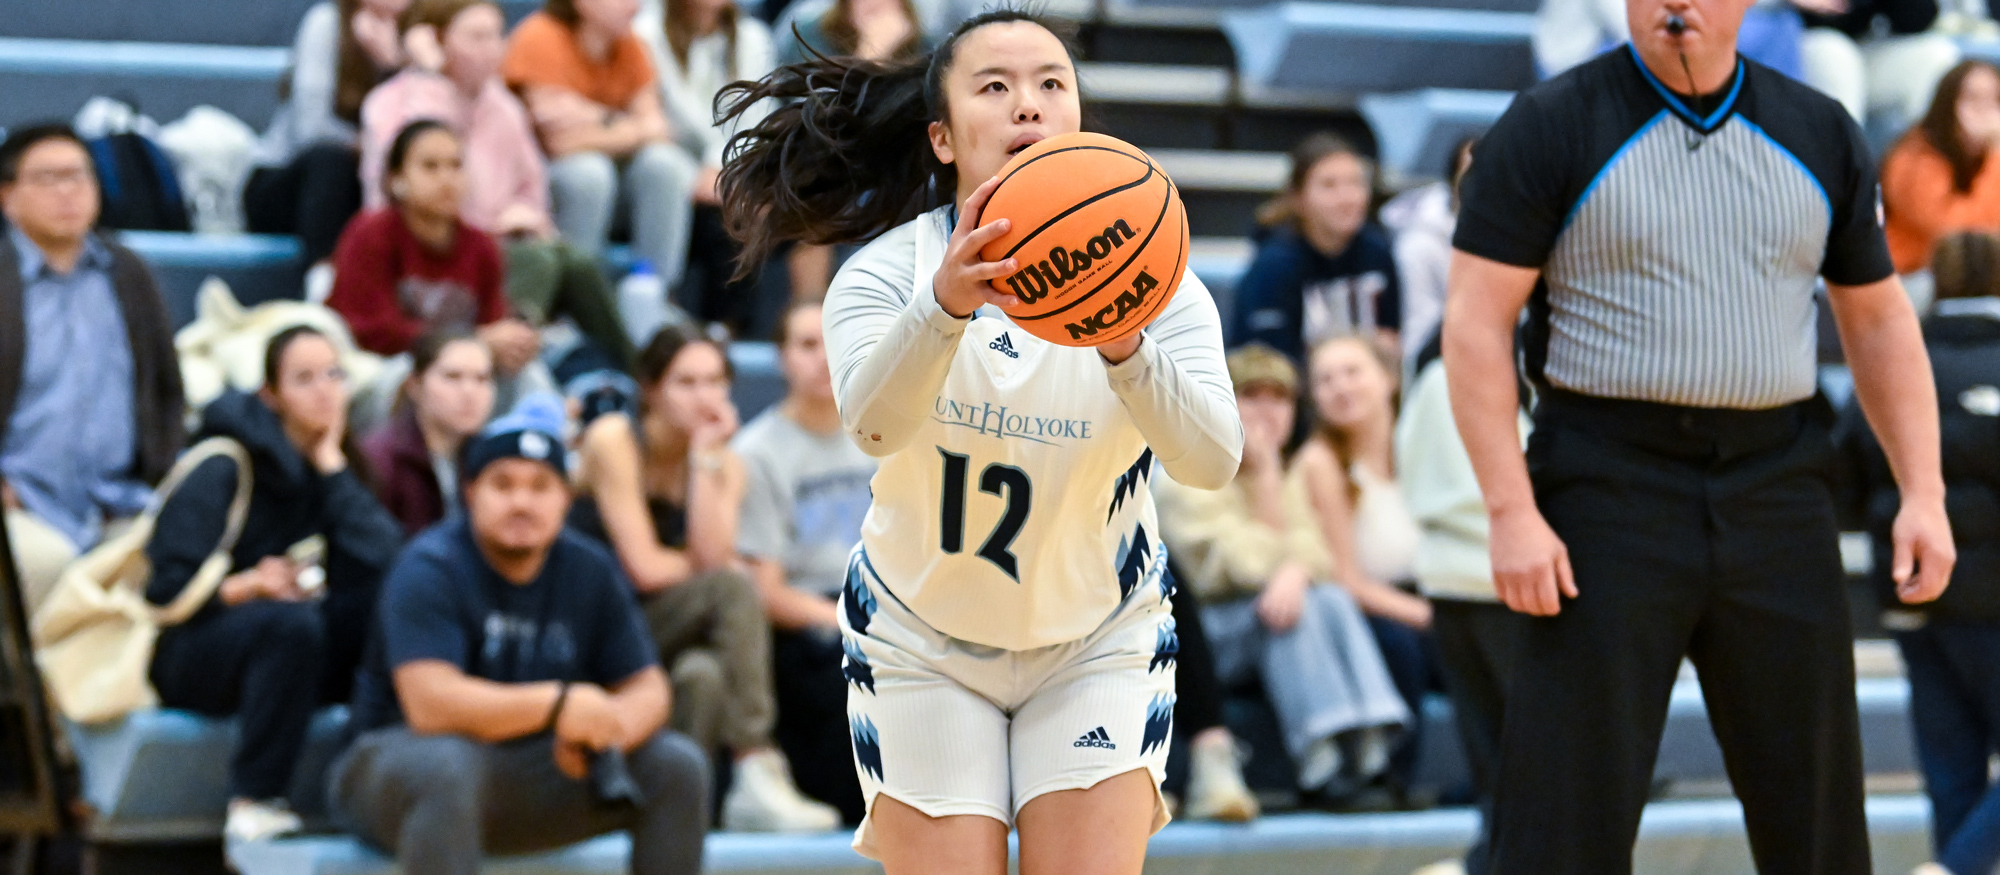 Libby Harris scored in double figures for the fifth time of the season with 10 points against SUNY Cobleskill on Jan. 4, 2024. (RJB Sports file photo)